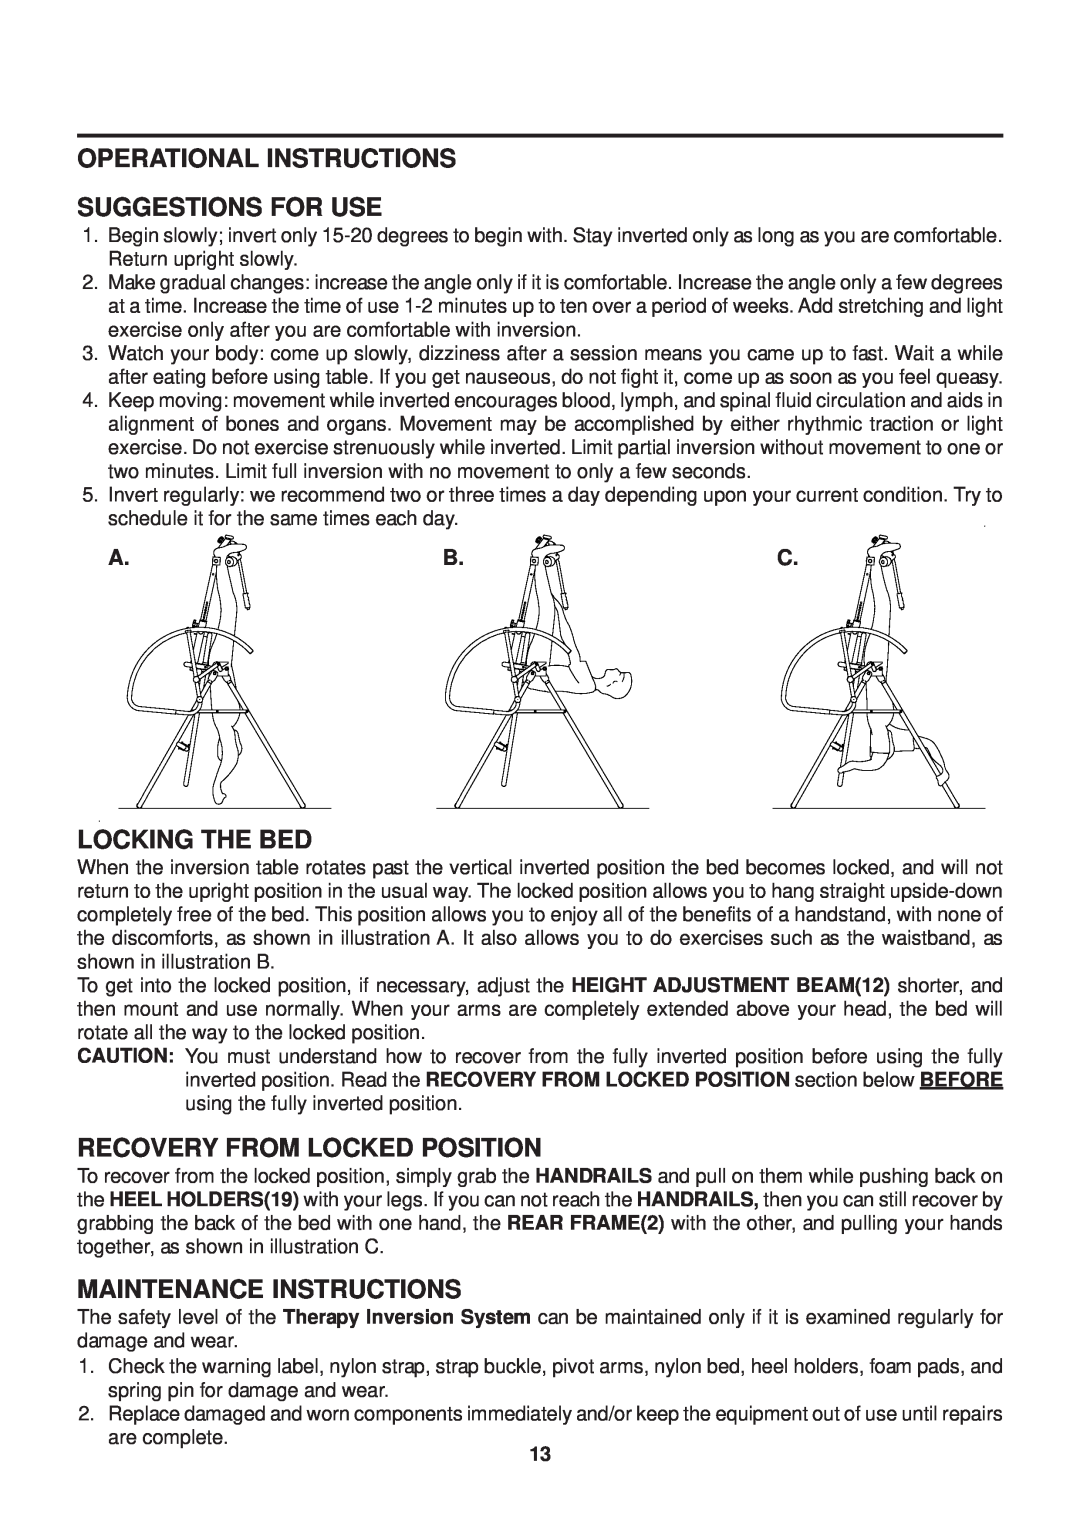 Stamina Products 55-1539A Operational Instructions Suggestions For Use, Locking The Bed, Recovery From Locked Position 